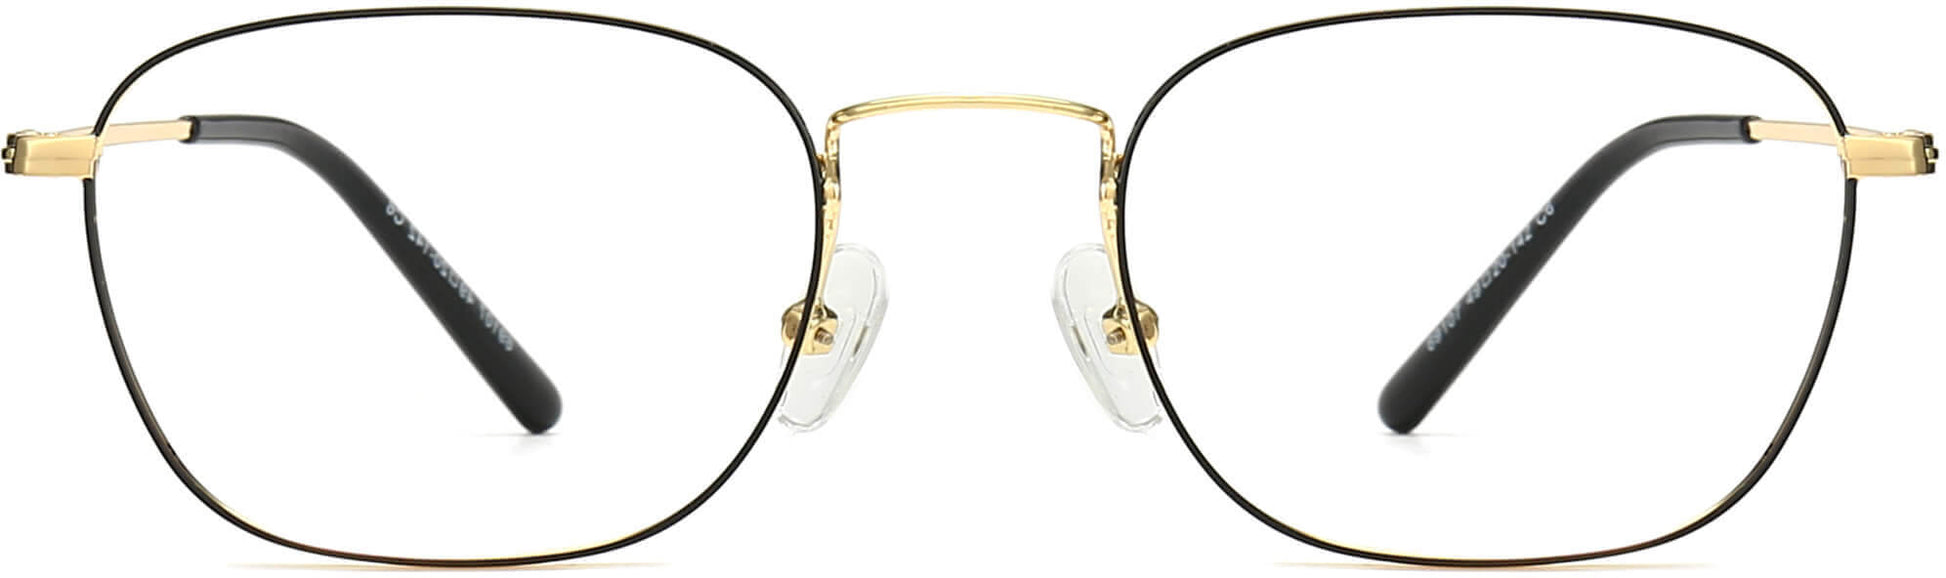 Moses Square Black Eyeglasses from ANRRI, front view